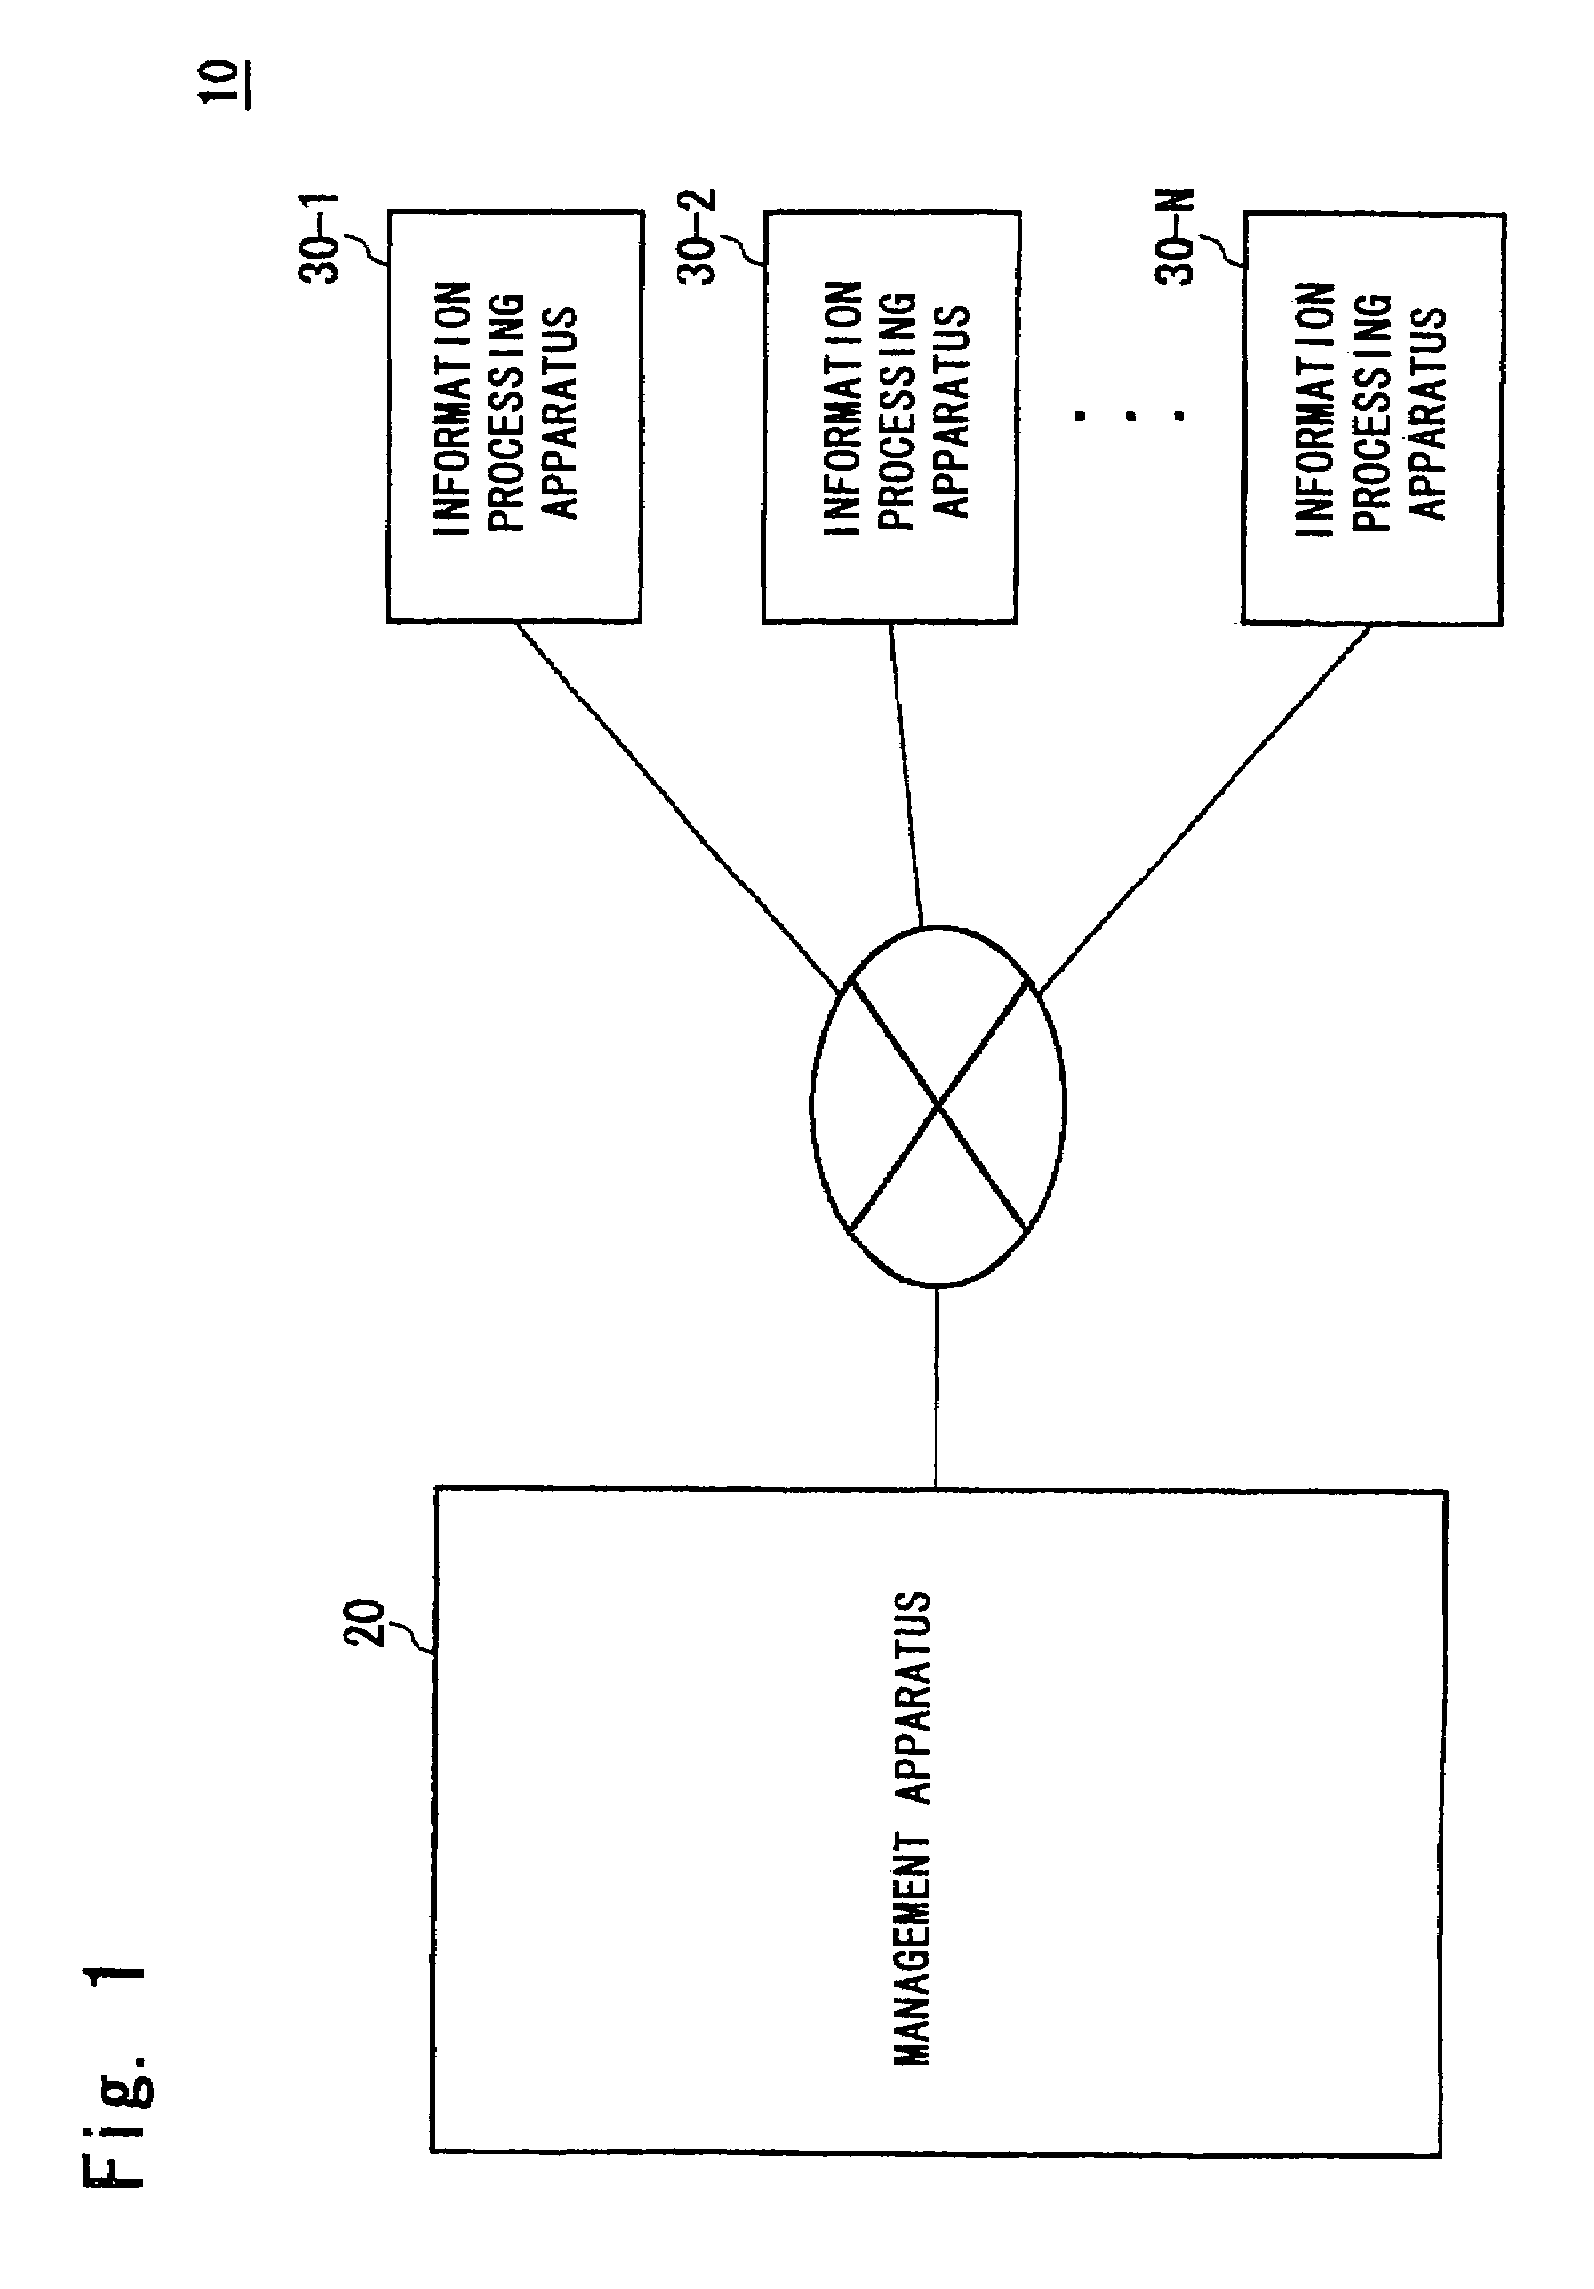 Method and apparatus for managing executions of a management program within a data processing system